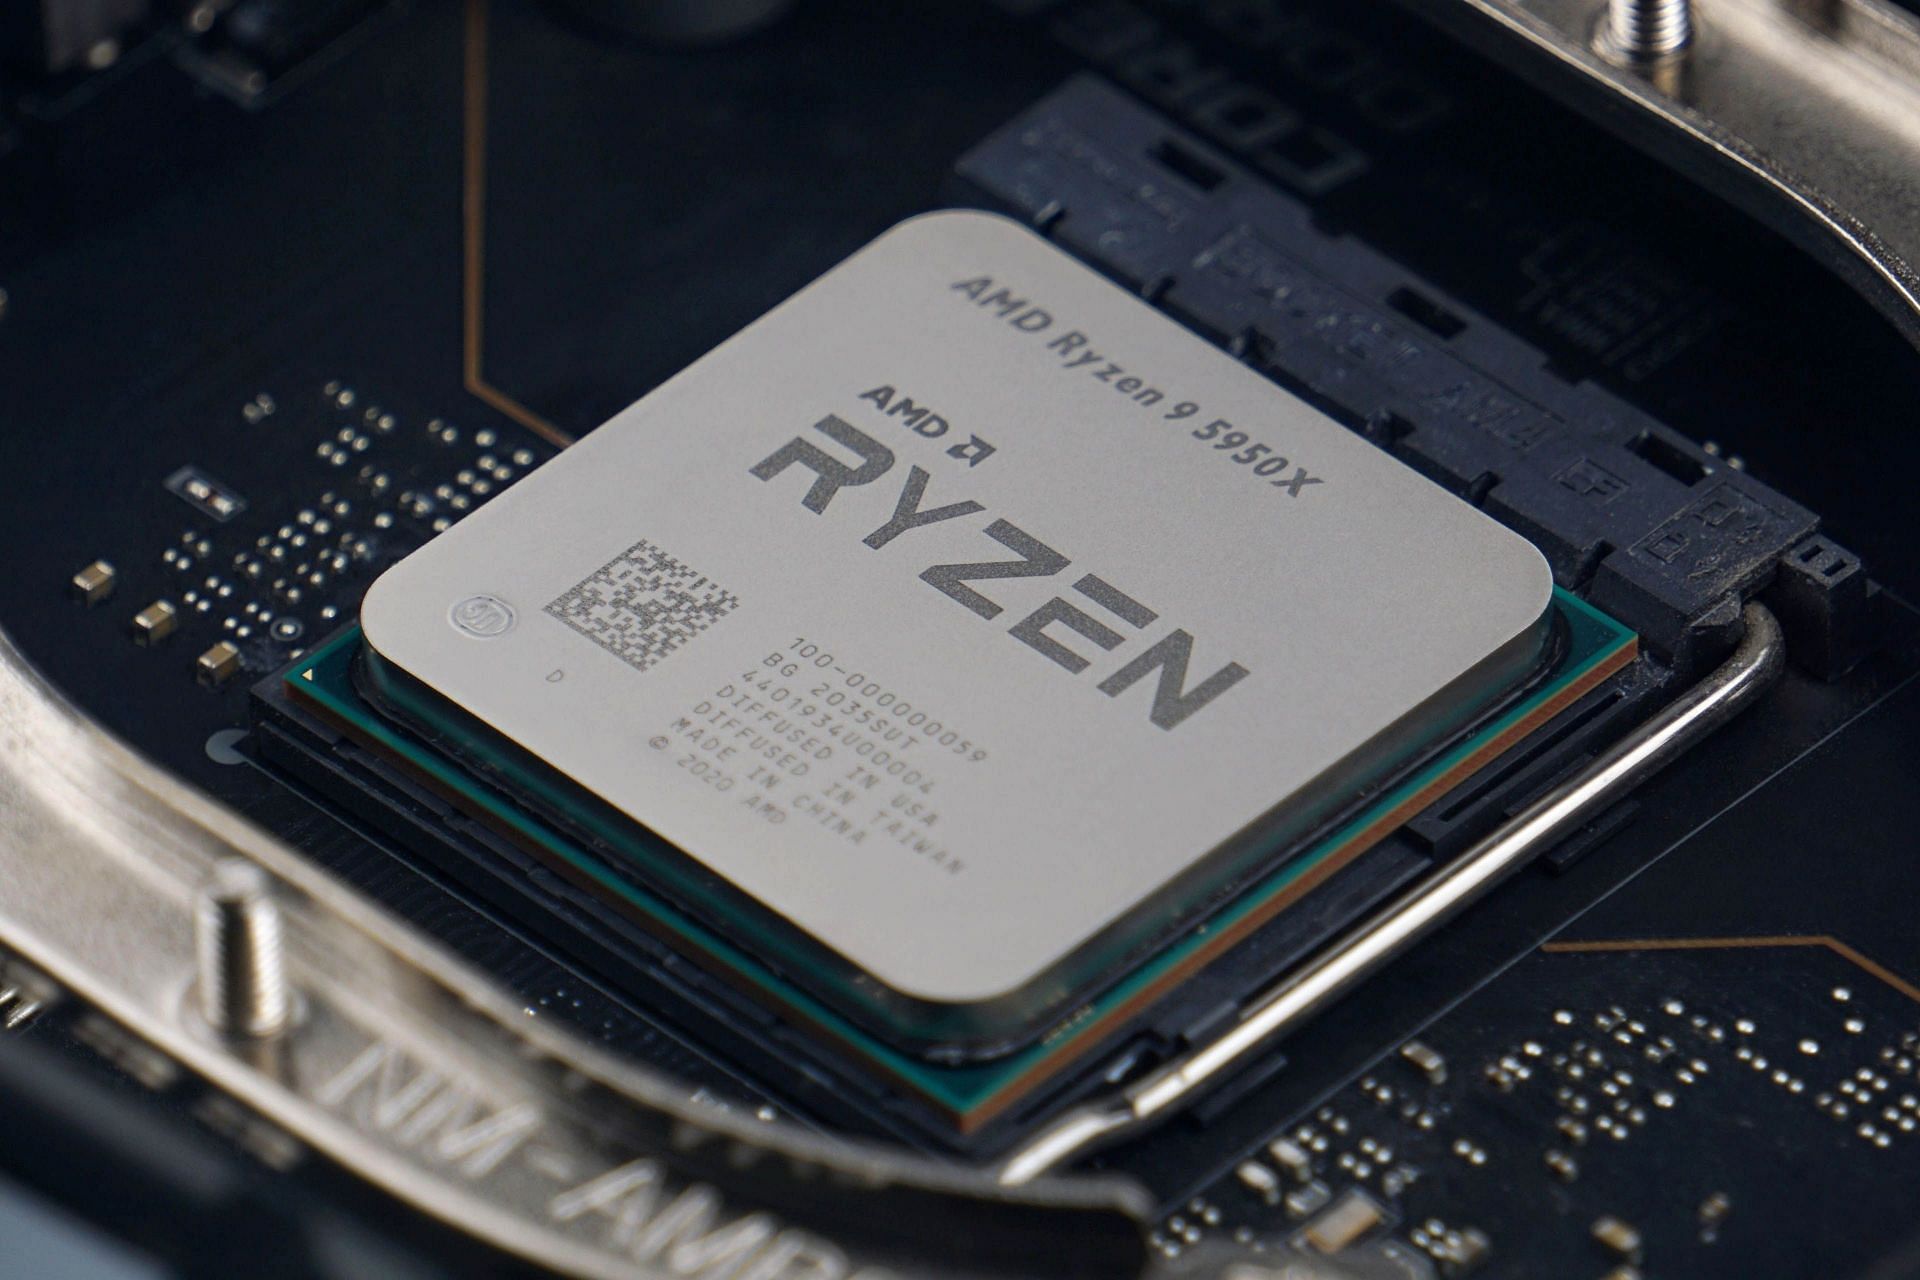 The Ryzen 9 5950x is a no-holds-barred performance monster (Image via HWcooling)